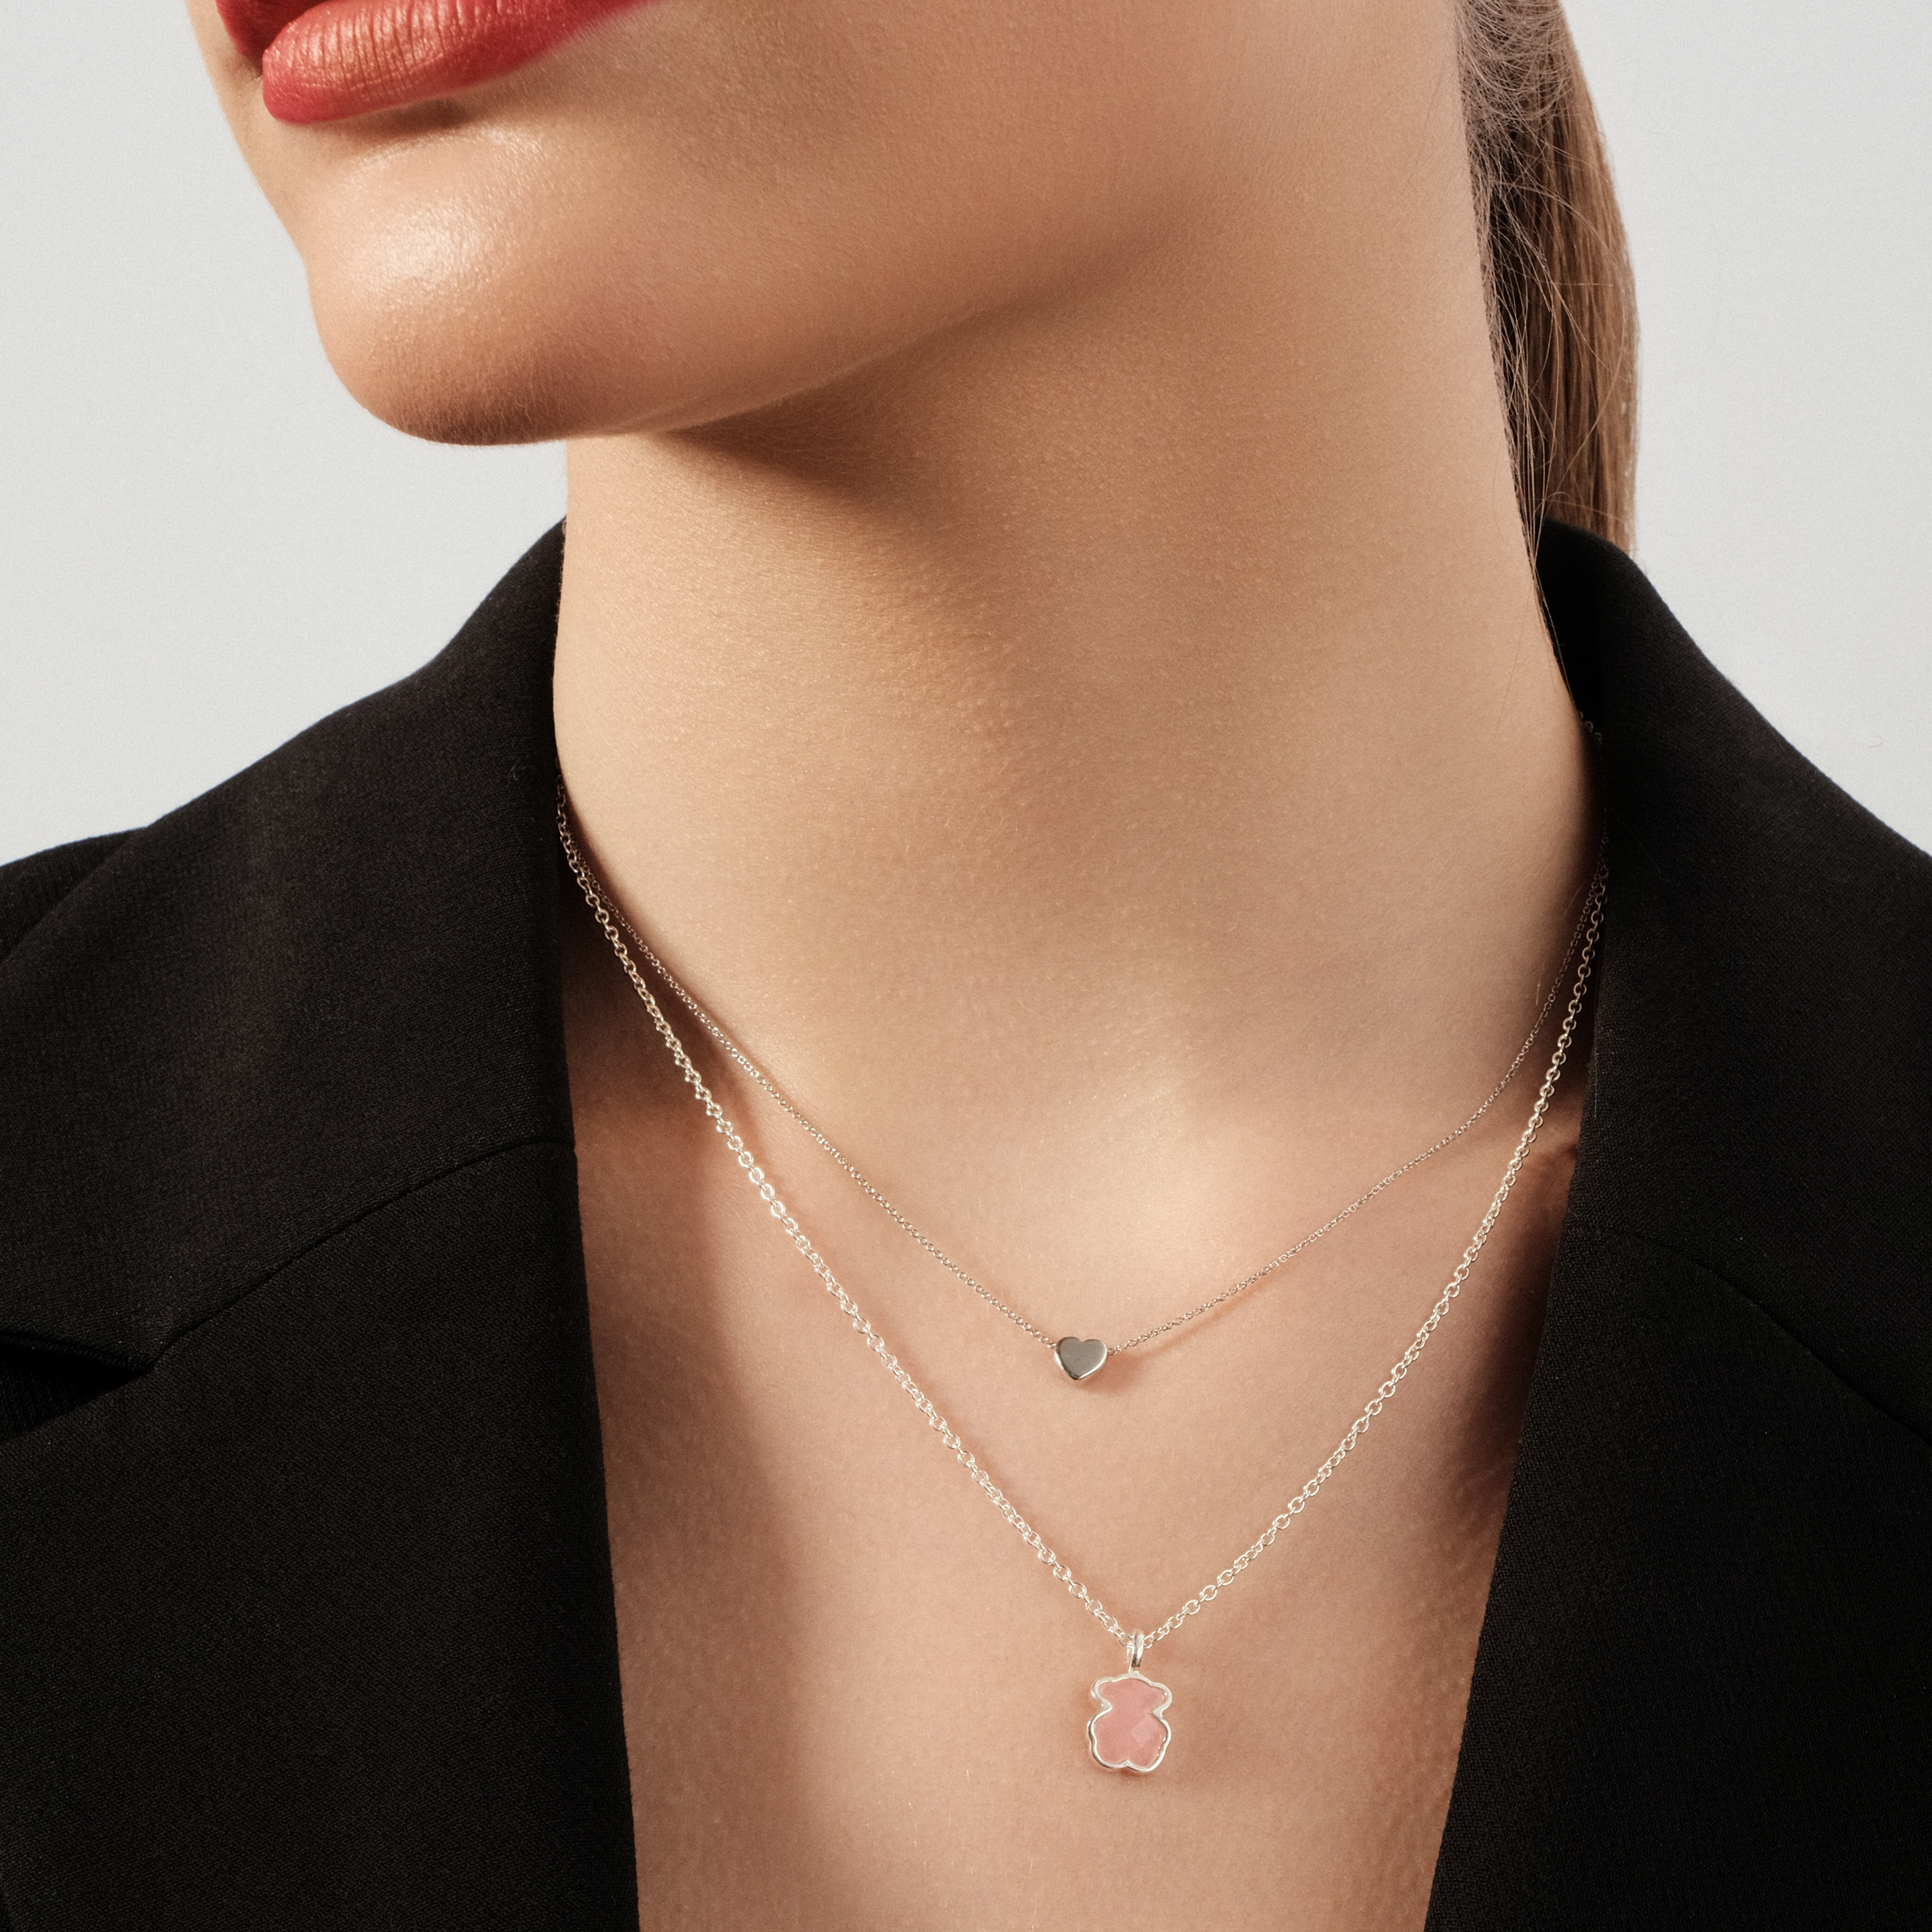 TOUS Bear necklace made of silver, pink faceted quartz – buy at 